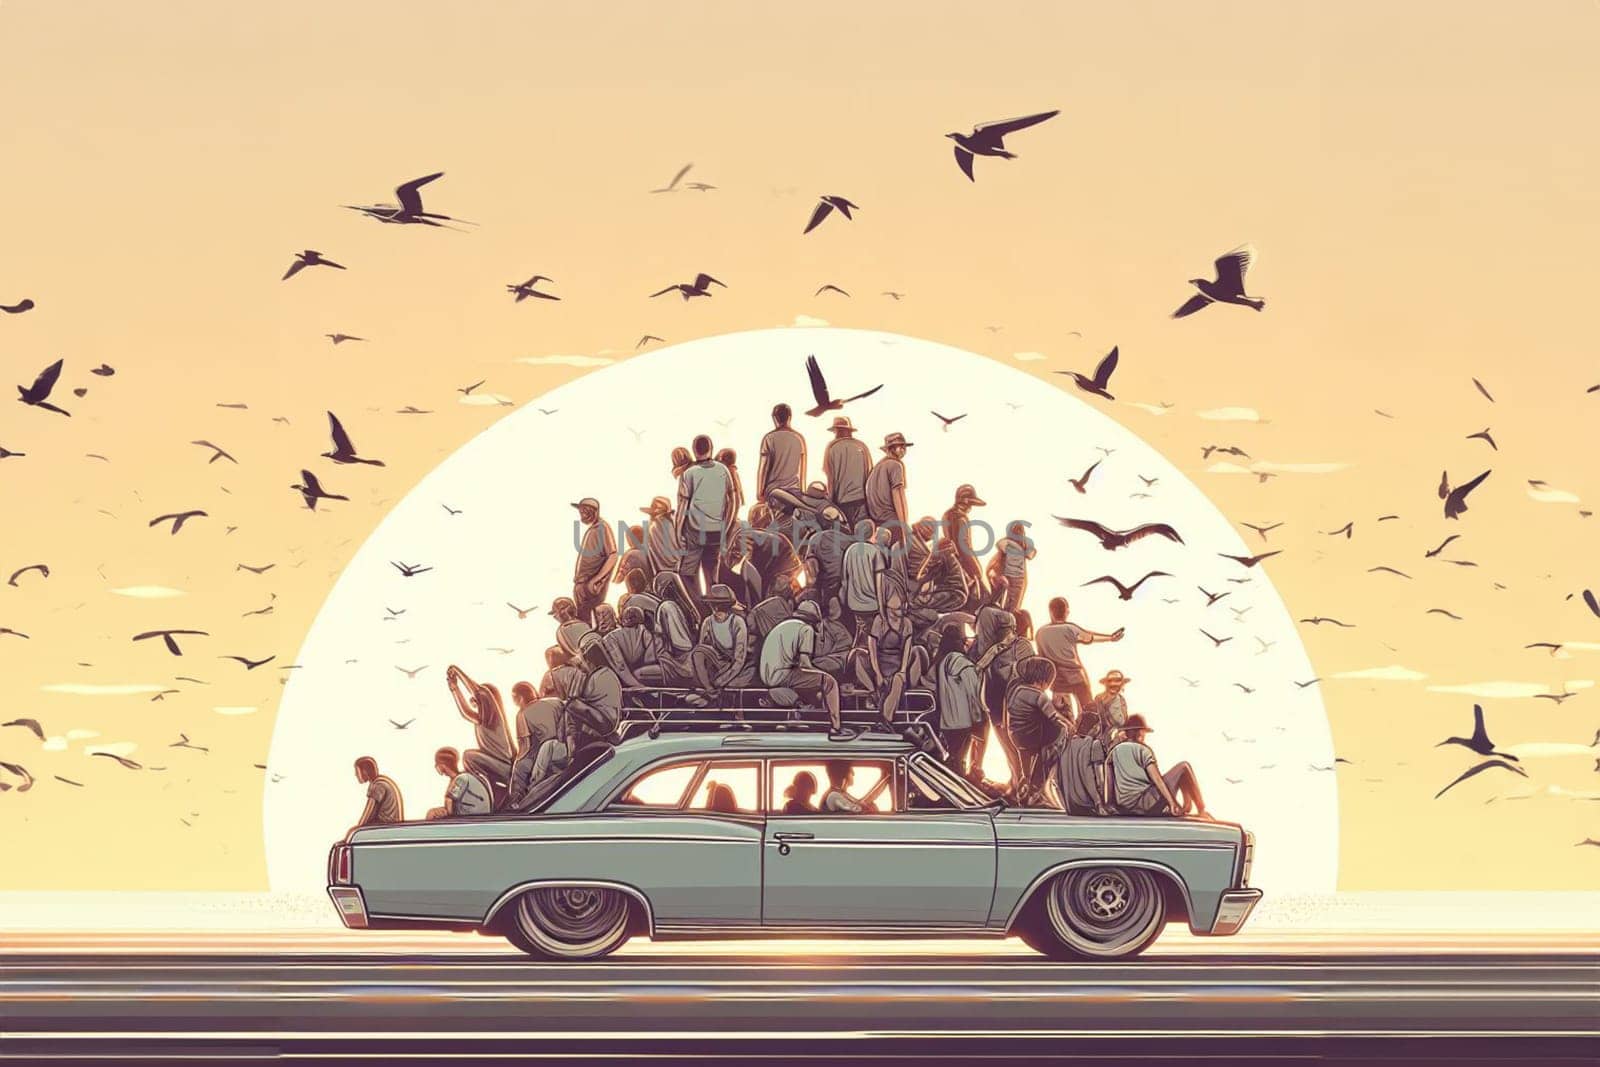 Huge Stack of luggage on crowded car roof , migration wave concept, steampunk retro illustration by verbano